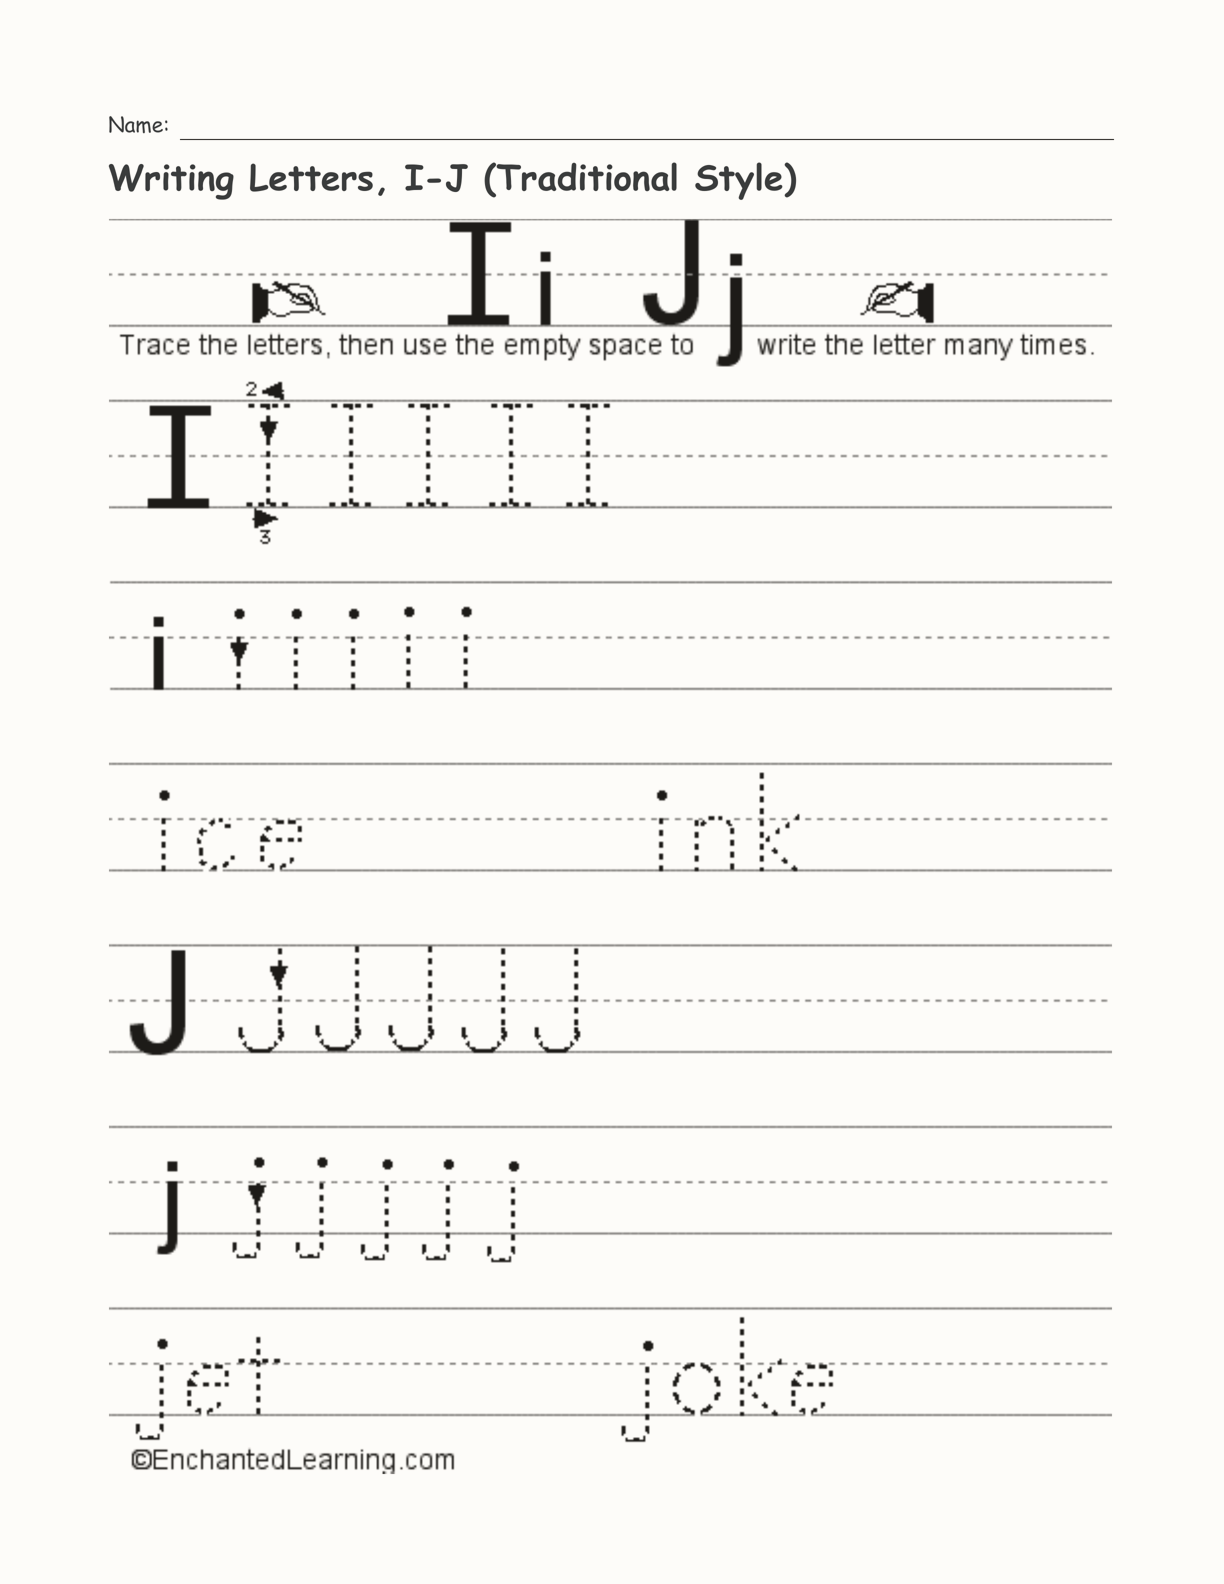 Writing Letters, I-J (Traditional Style) interactive worksheet page 1